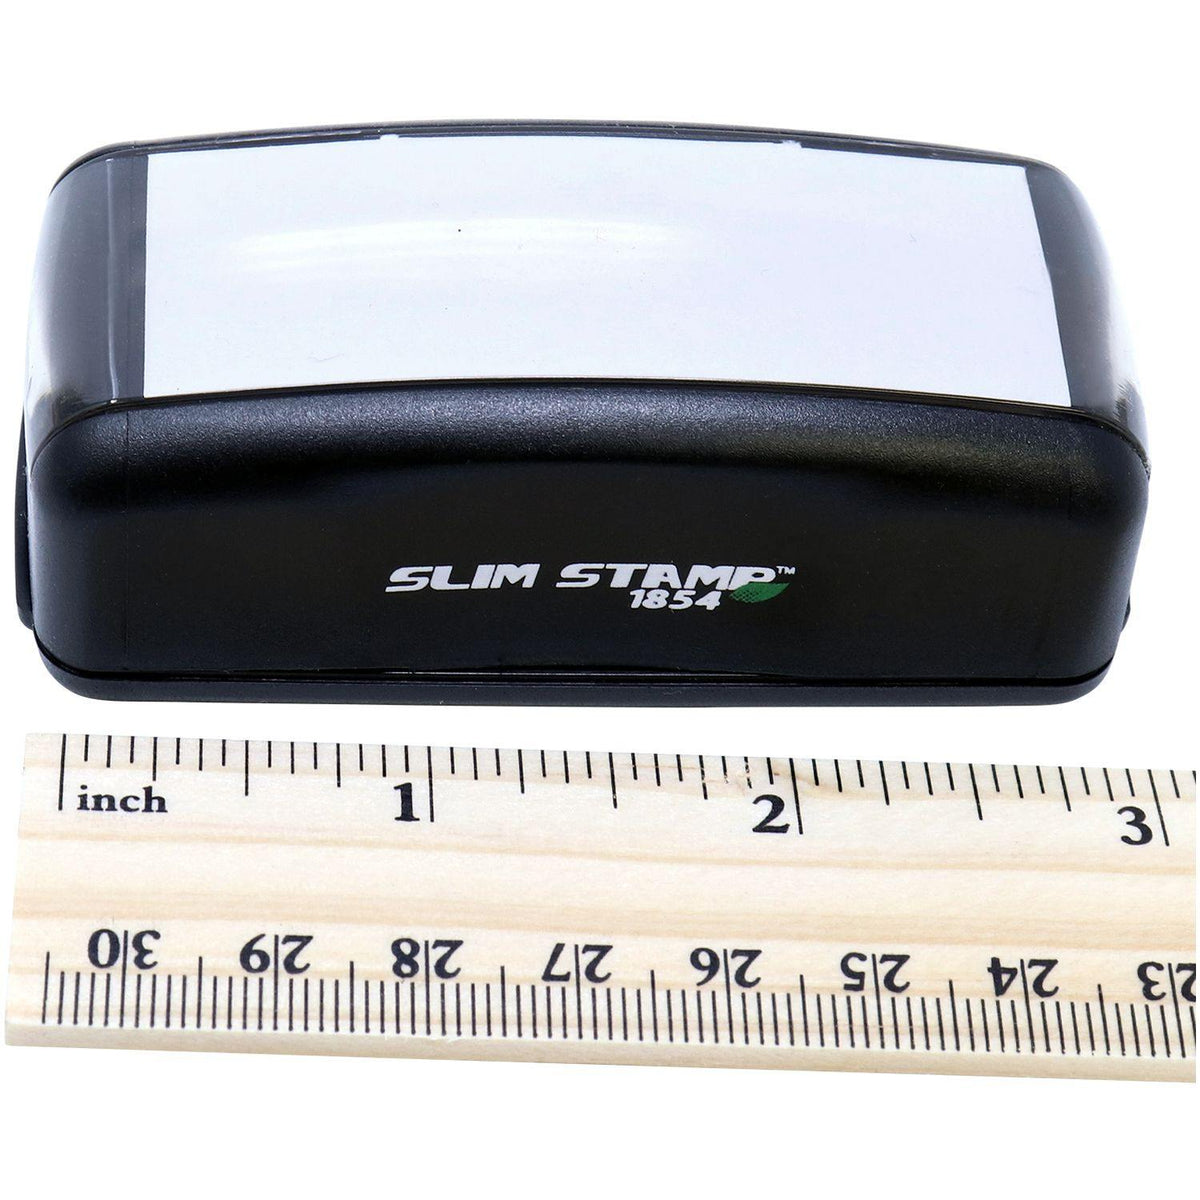 Measurement Large Pre-Inked Contact Tracing Stamp with Ruler